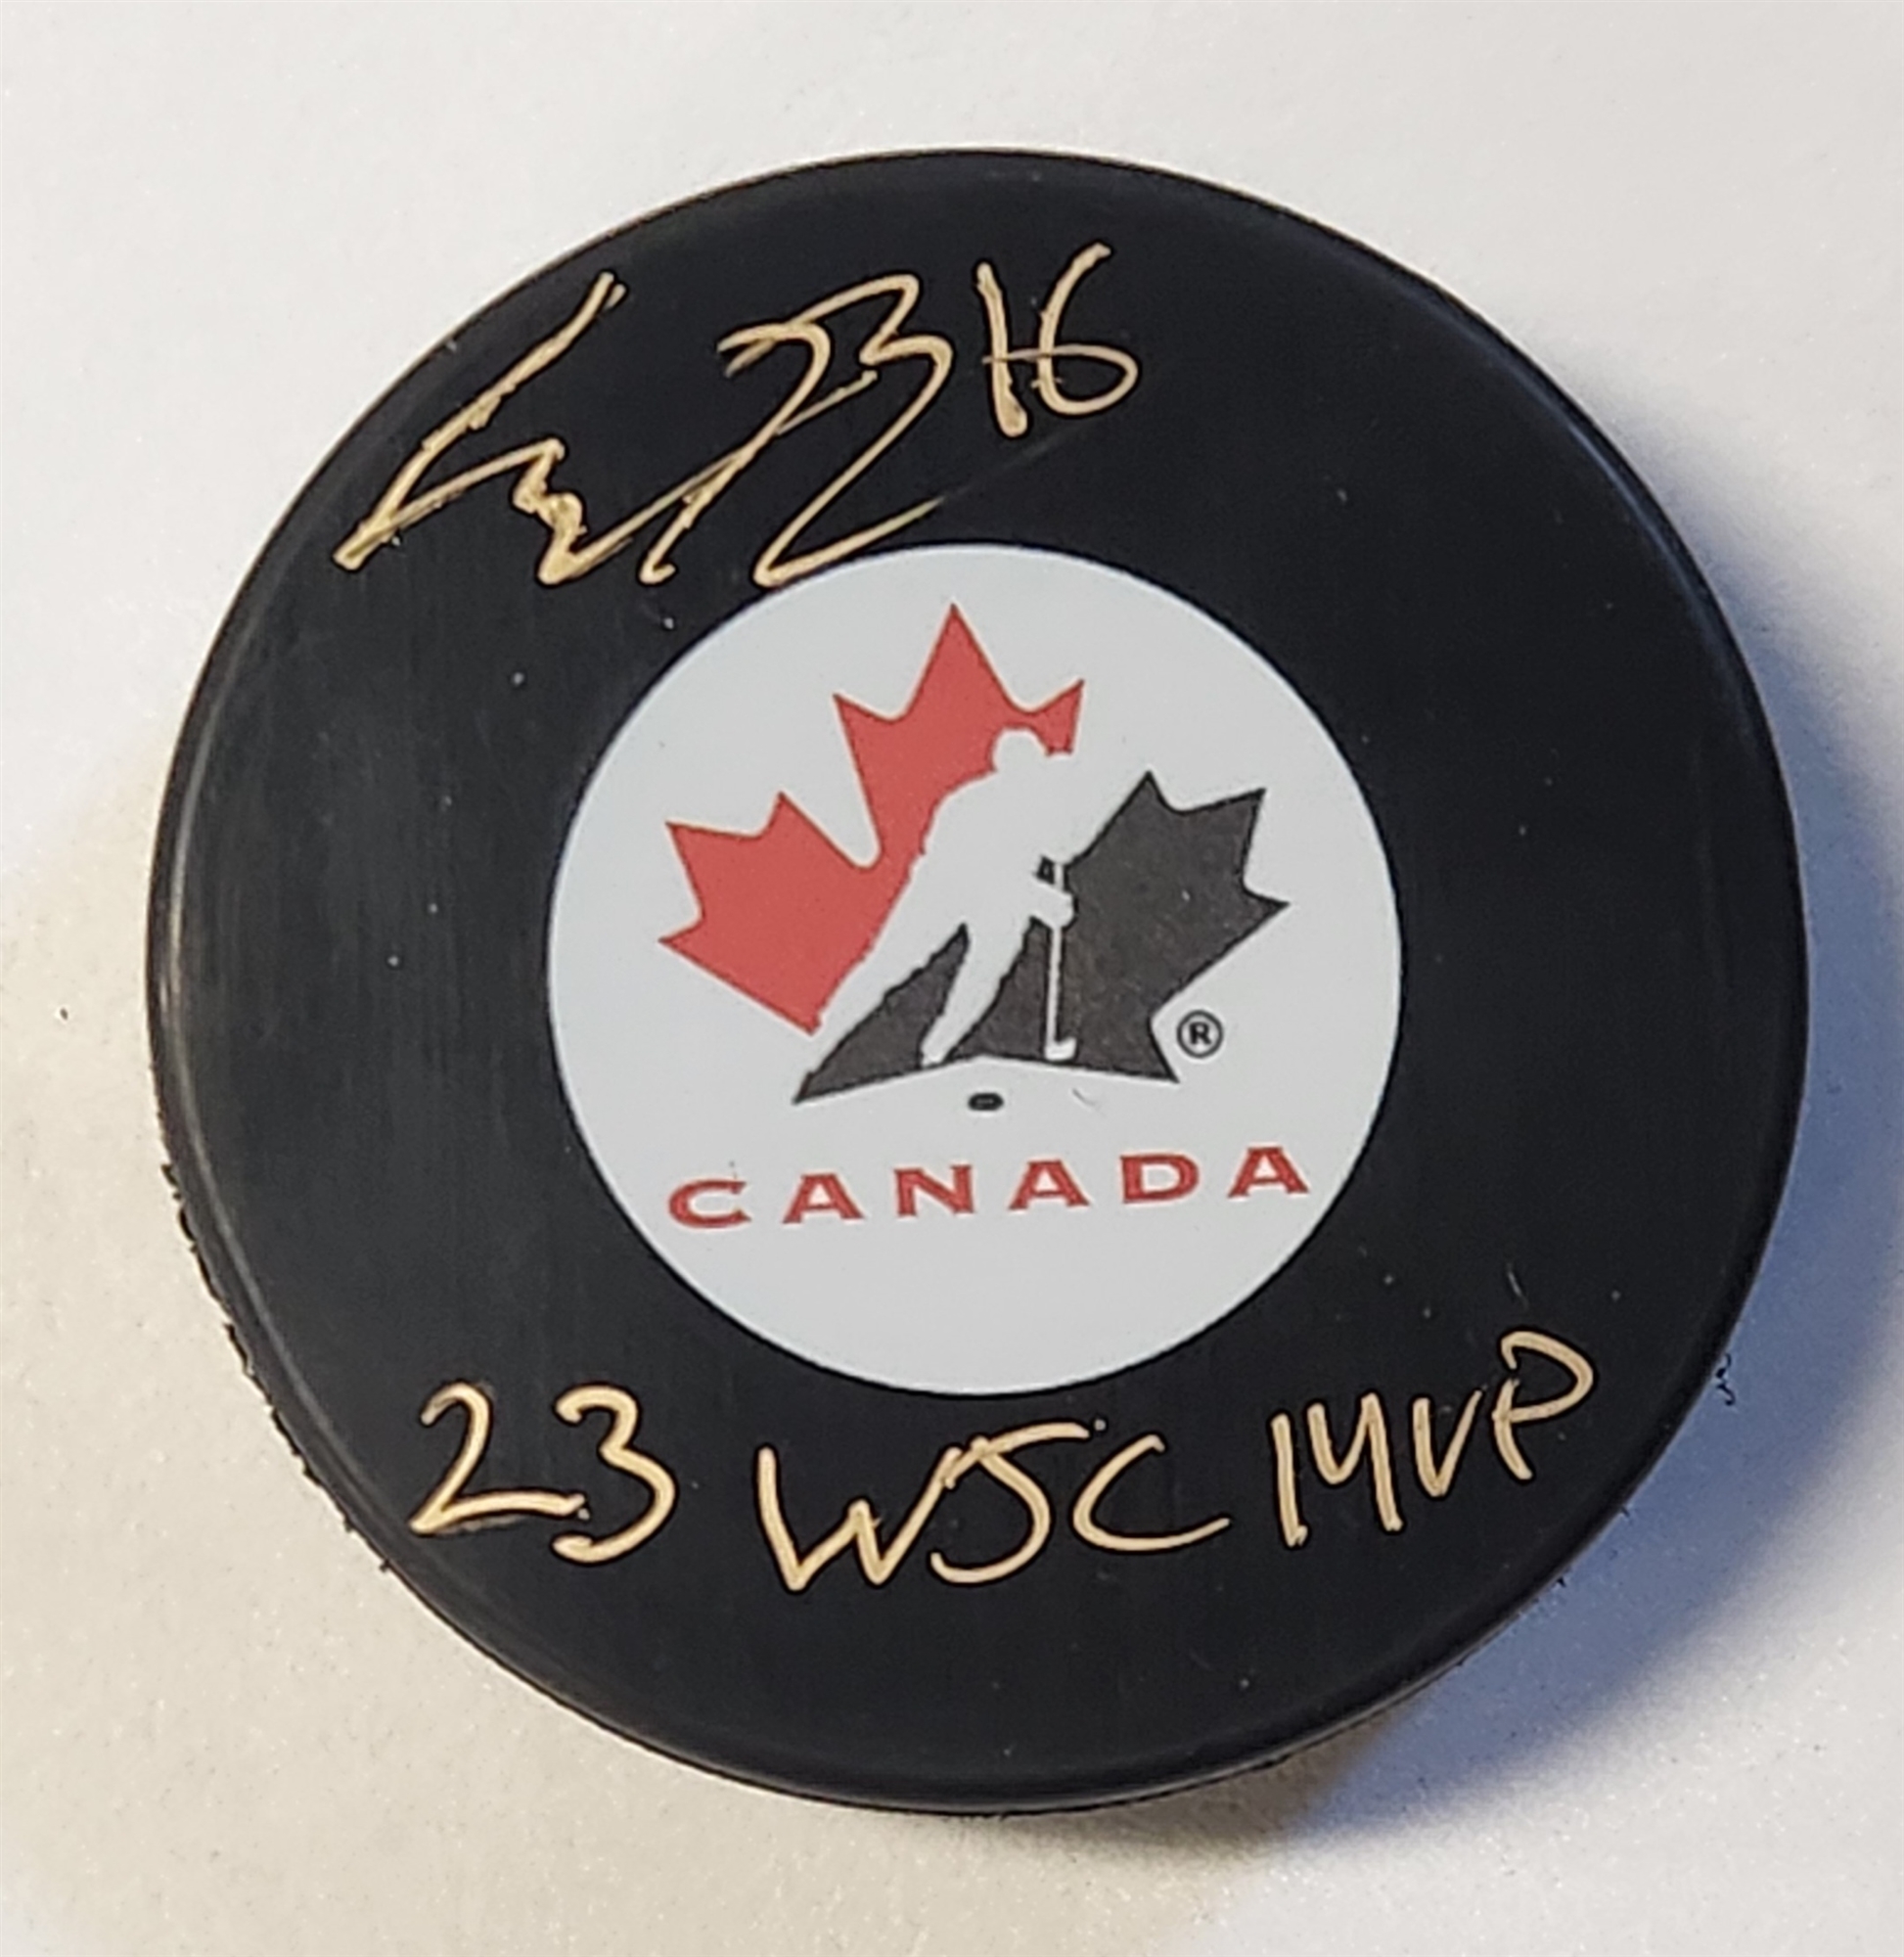 Connor Bedard Autographed Team Canada Hockey Puck with 23 WJC MVP